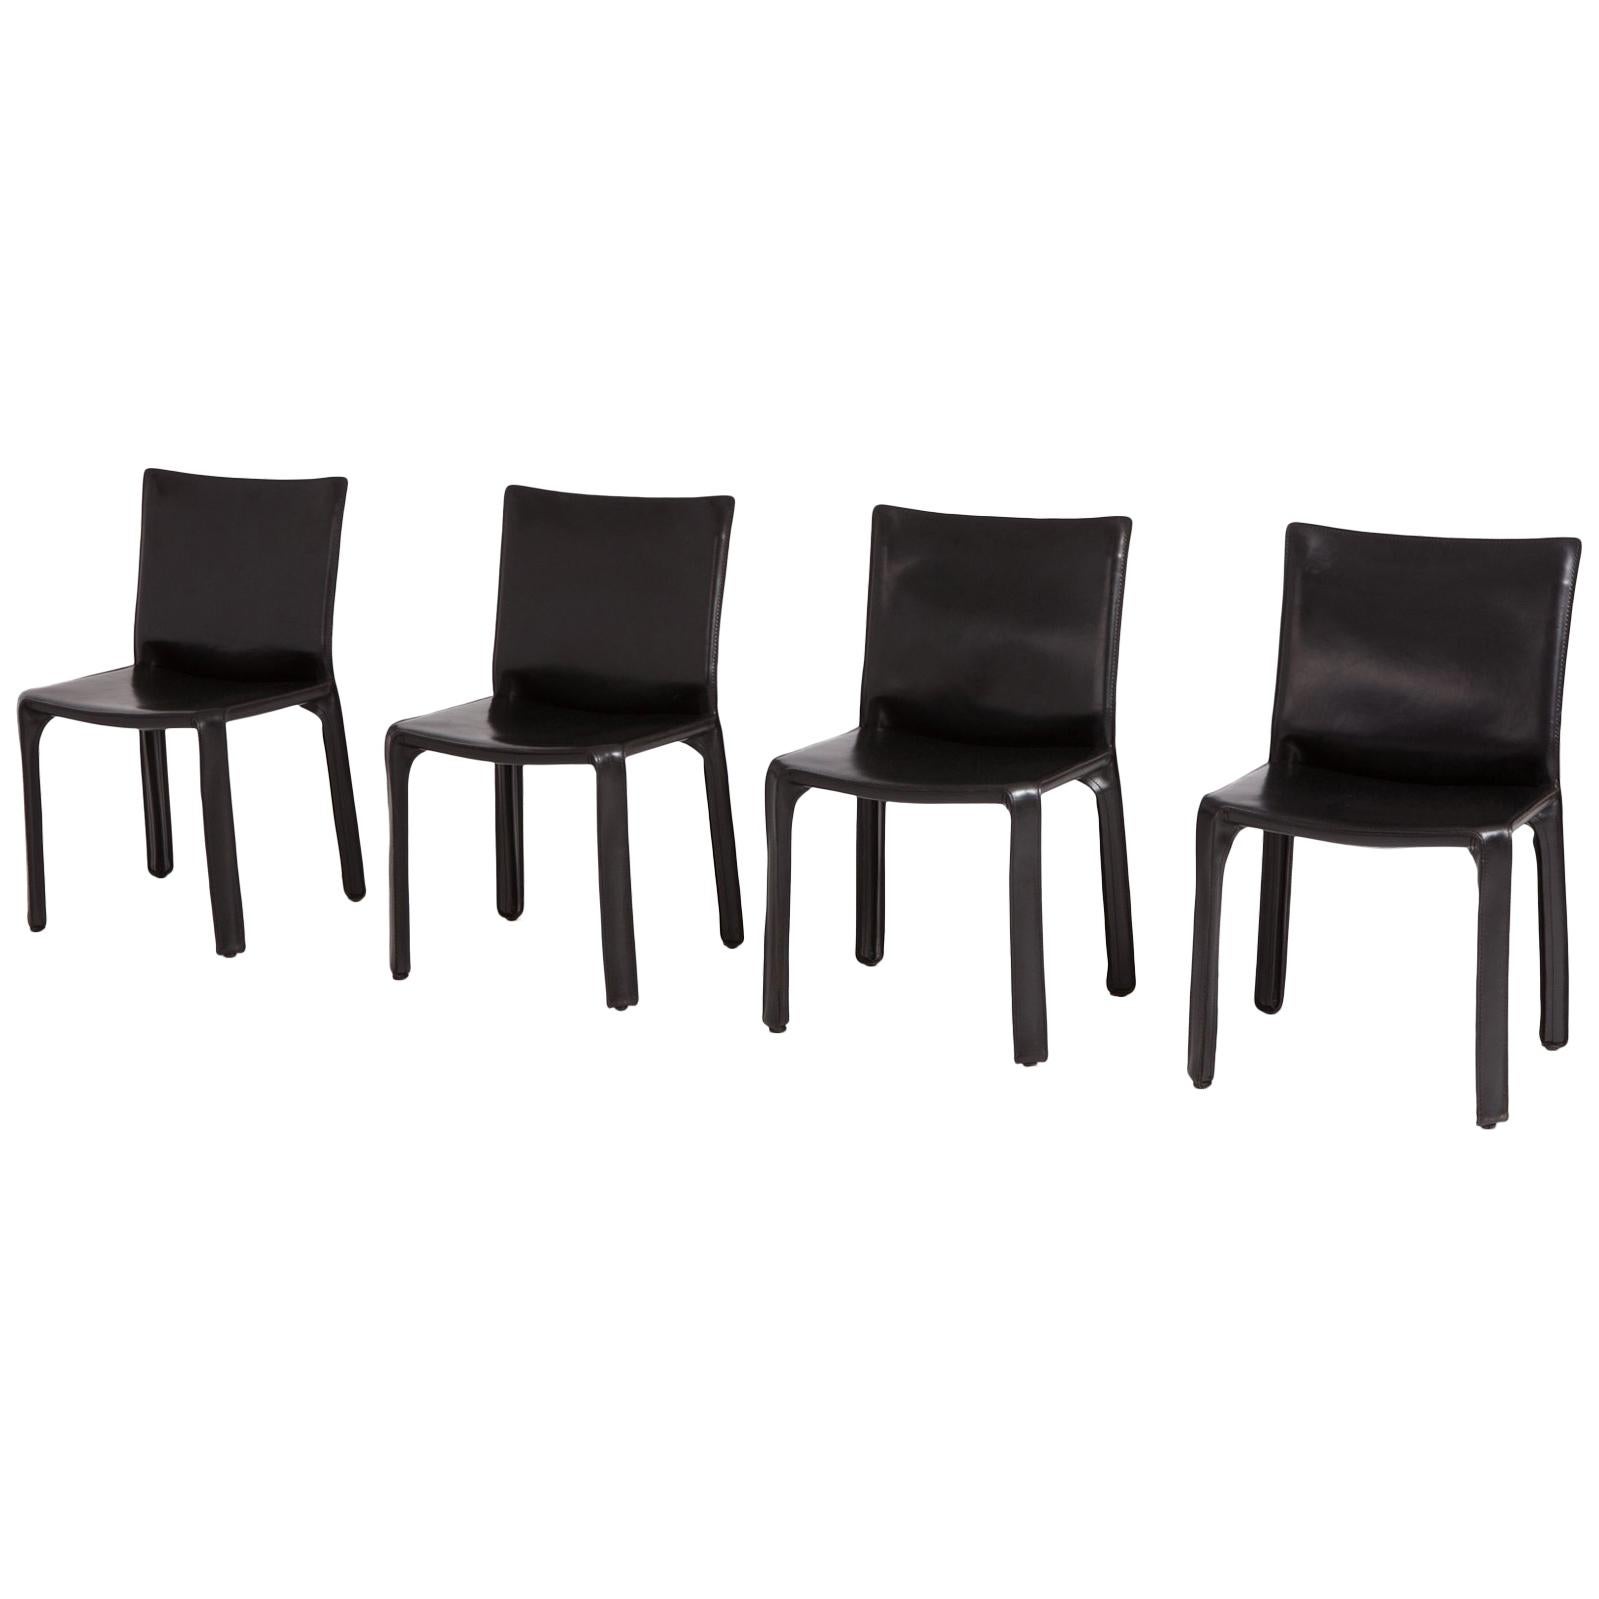 Mario Bellini Cab Chairs in Black Leather for Cassina